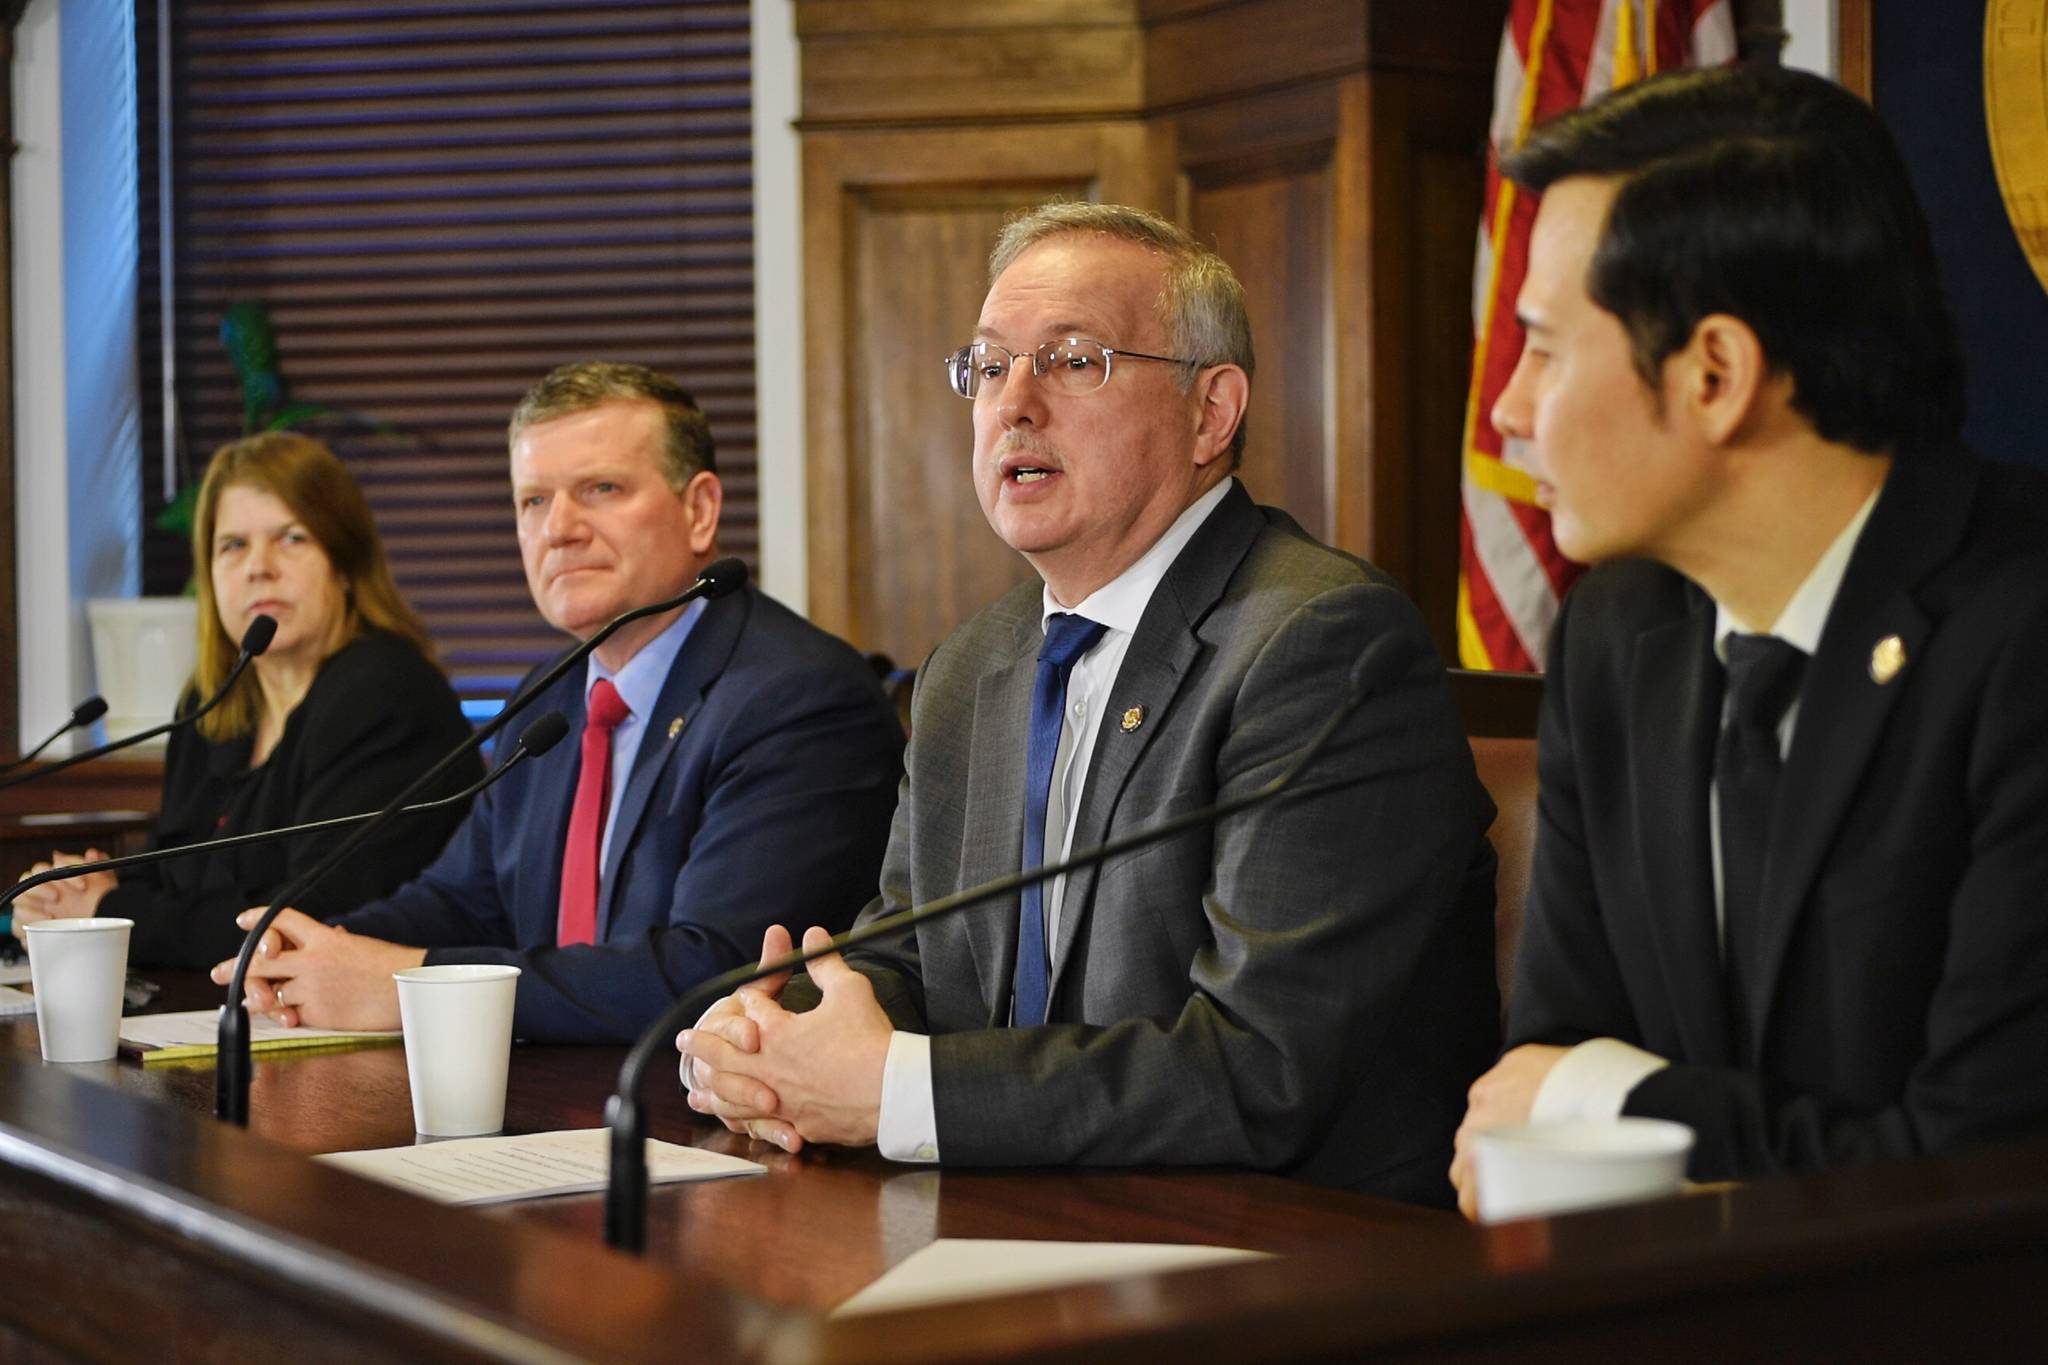 Speaker of the House Bryce Edgmon, I-Dillingham, second from right, speaks during a House Majority press conference at the Capitol on Thursday, March 28, 2019. Also attending the conference are Finance Committee co-chairs, Reps. Neal Foster, D-Nome, right and Tammie Wilson, R-North Pole, left, as well as Rep. Chuck Kopp, R-Anchorage, Chair of the Rules Committee. (Michael Penn | Juneau Empire)